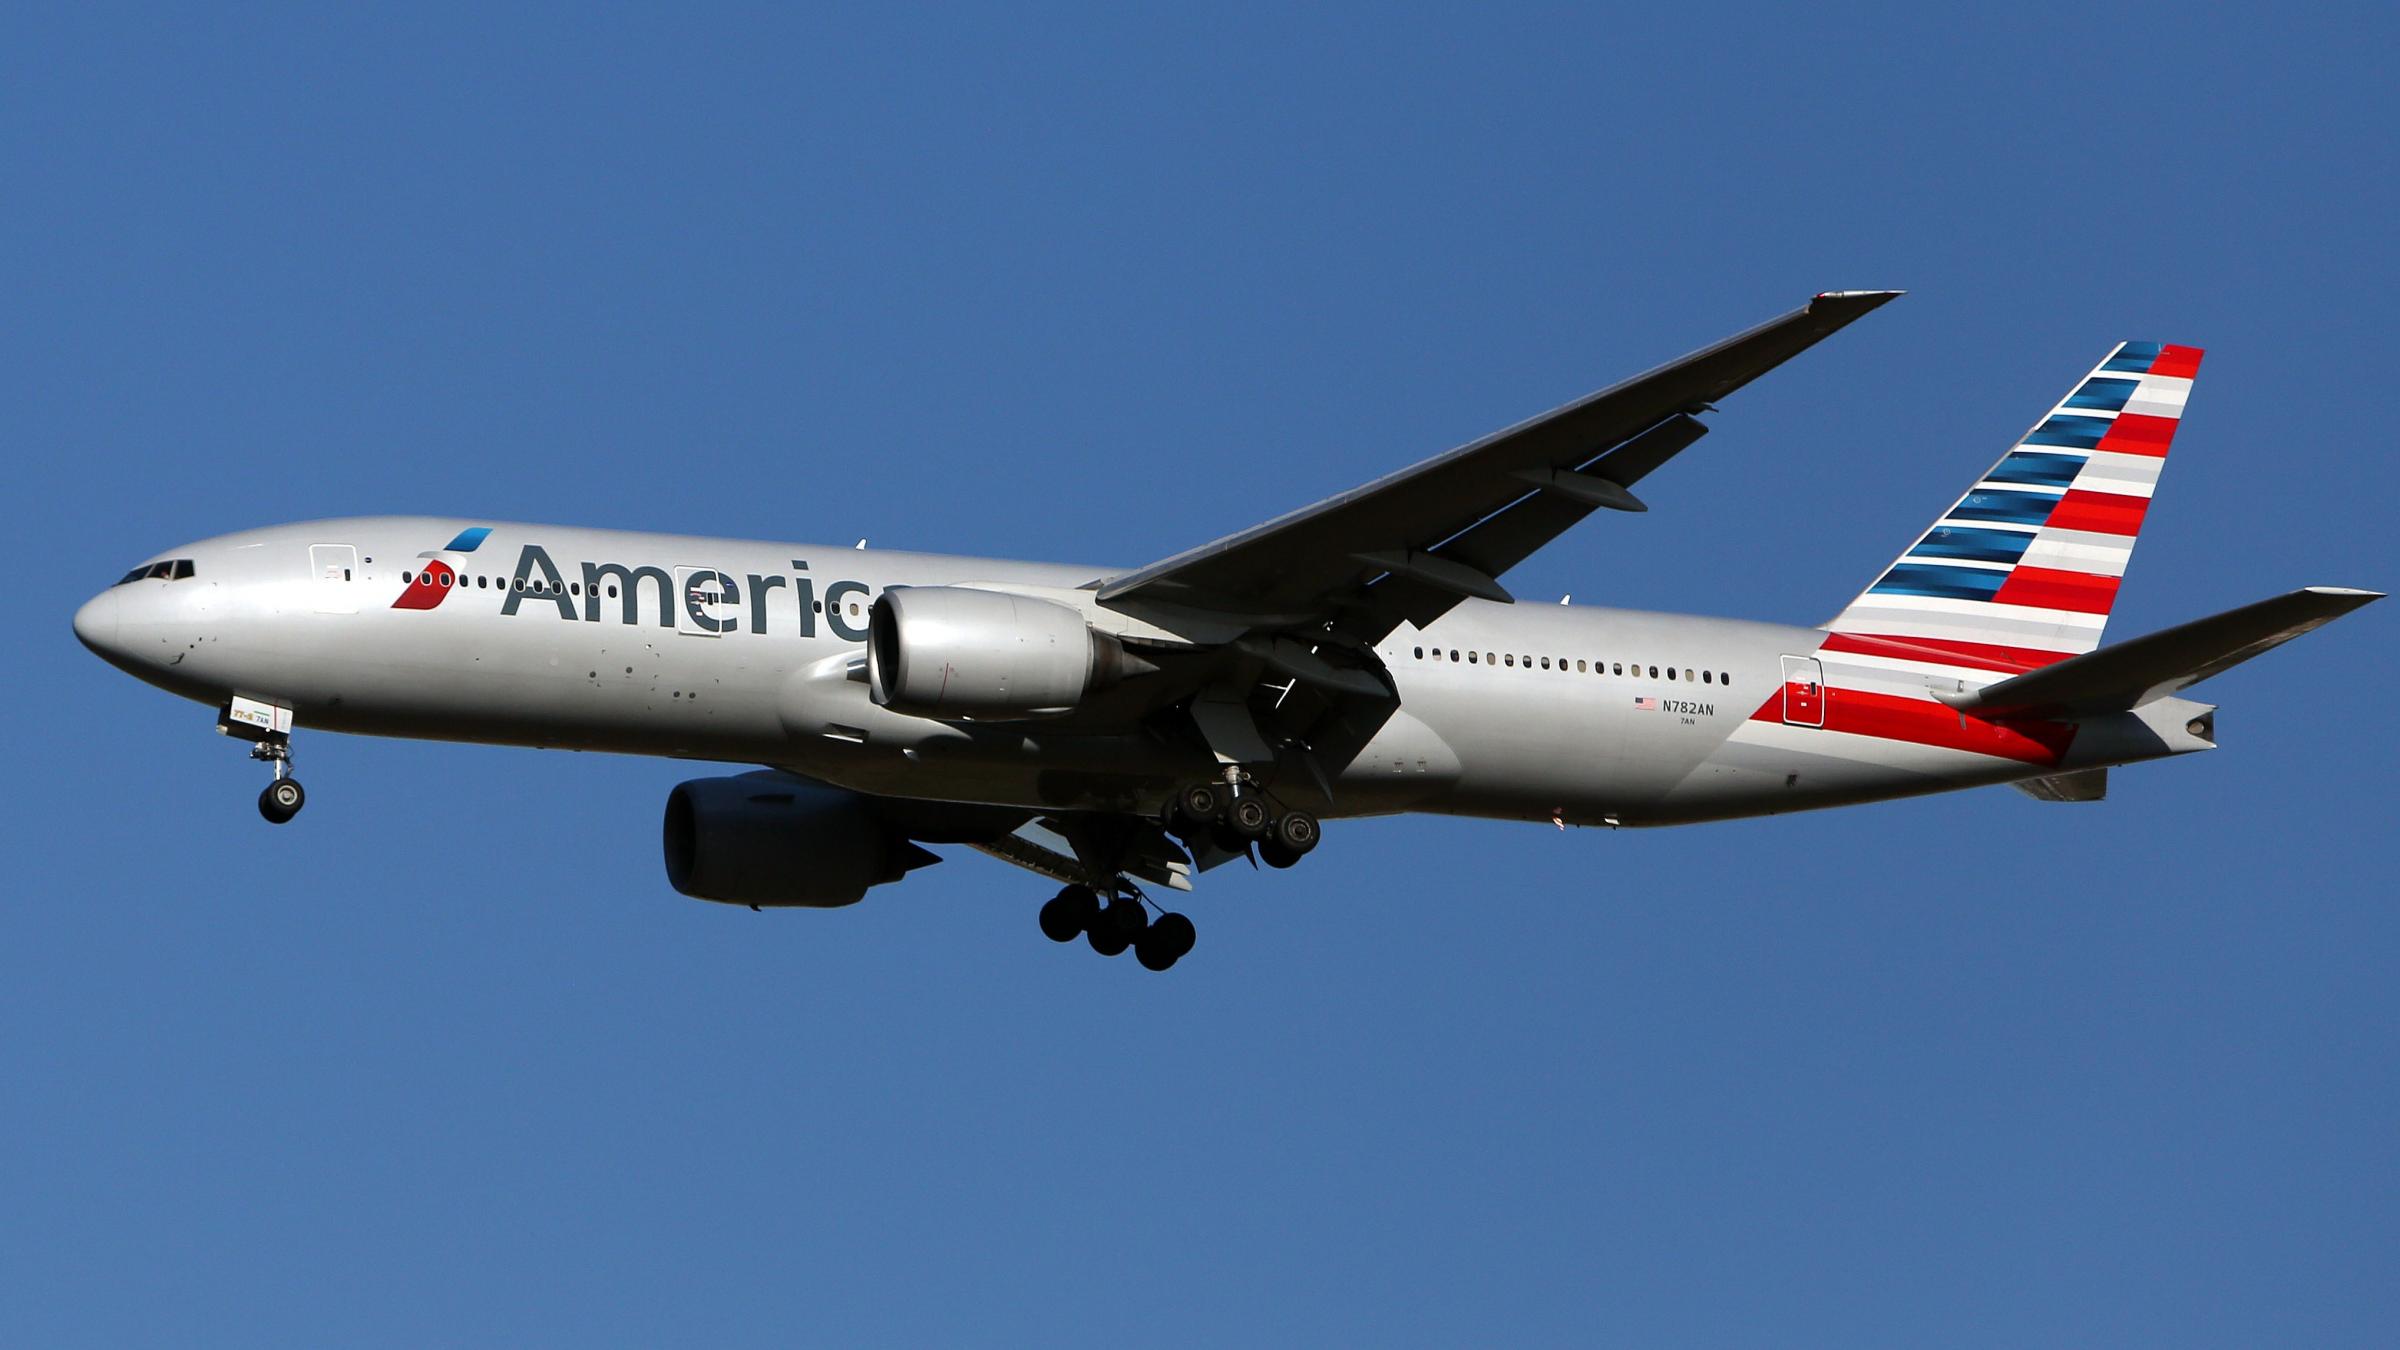 American Airlines grounds flight attendant following confrontation - Ealing Times